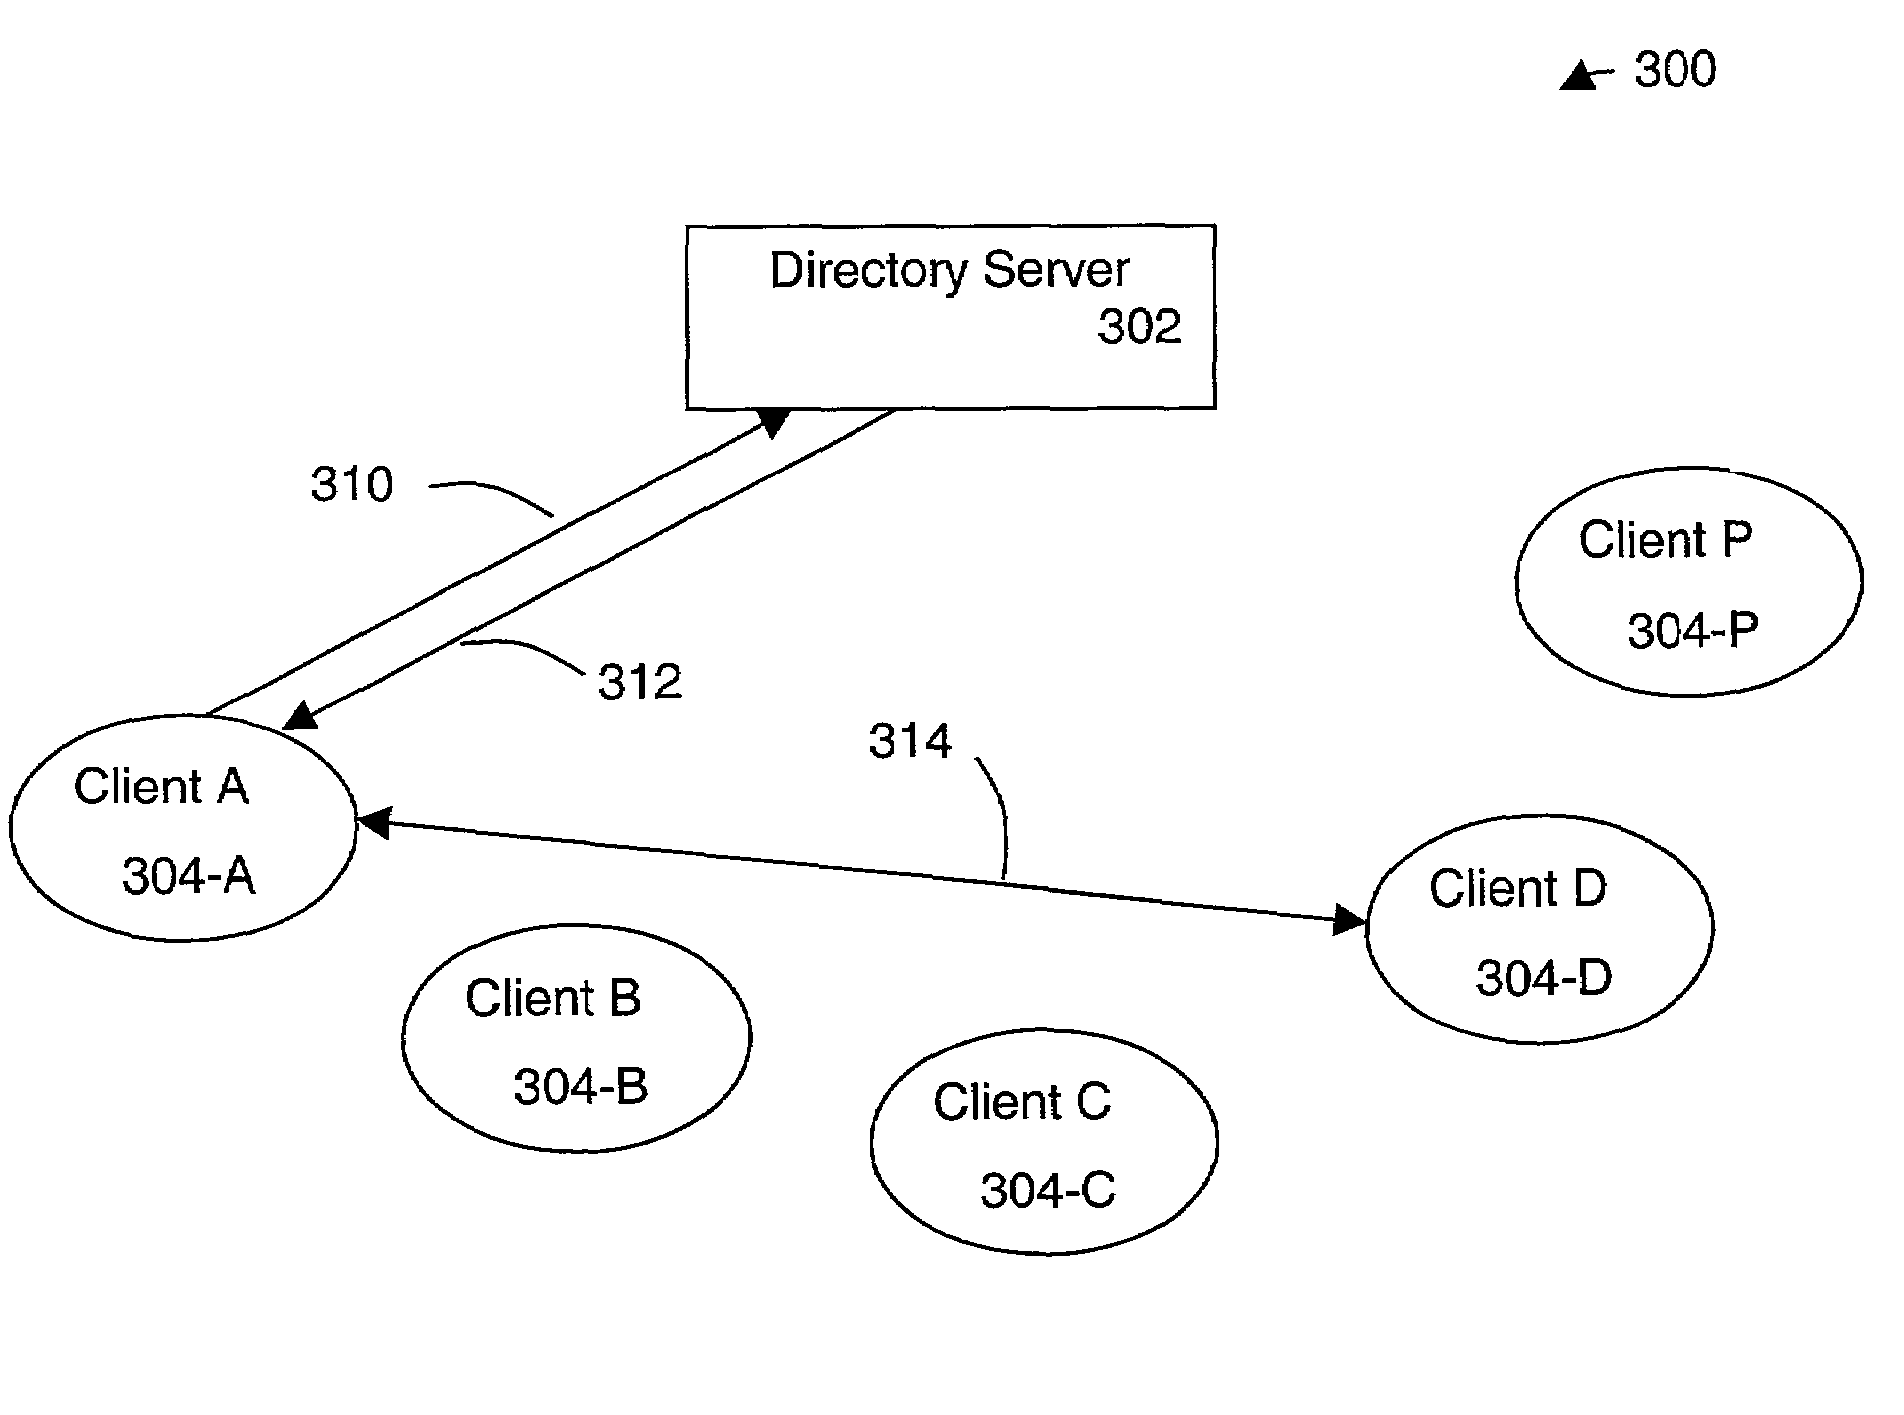 Method and apparatus for peer-to-peer services for efficient transfer of information between networks